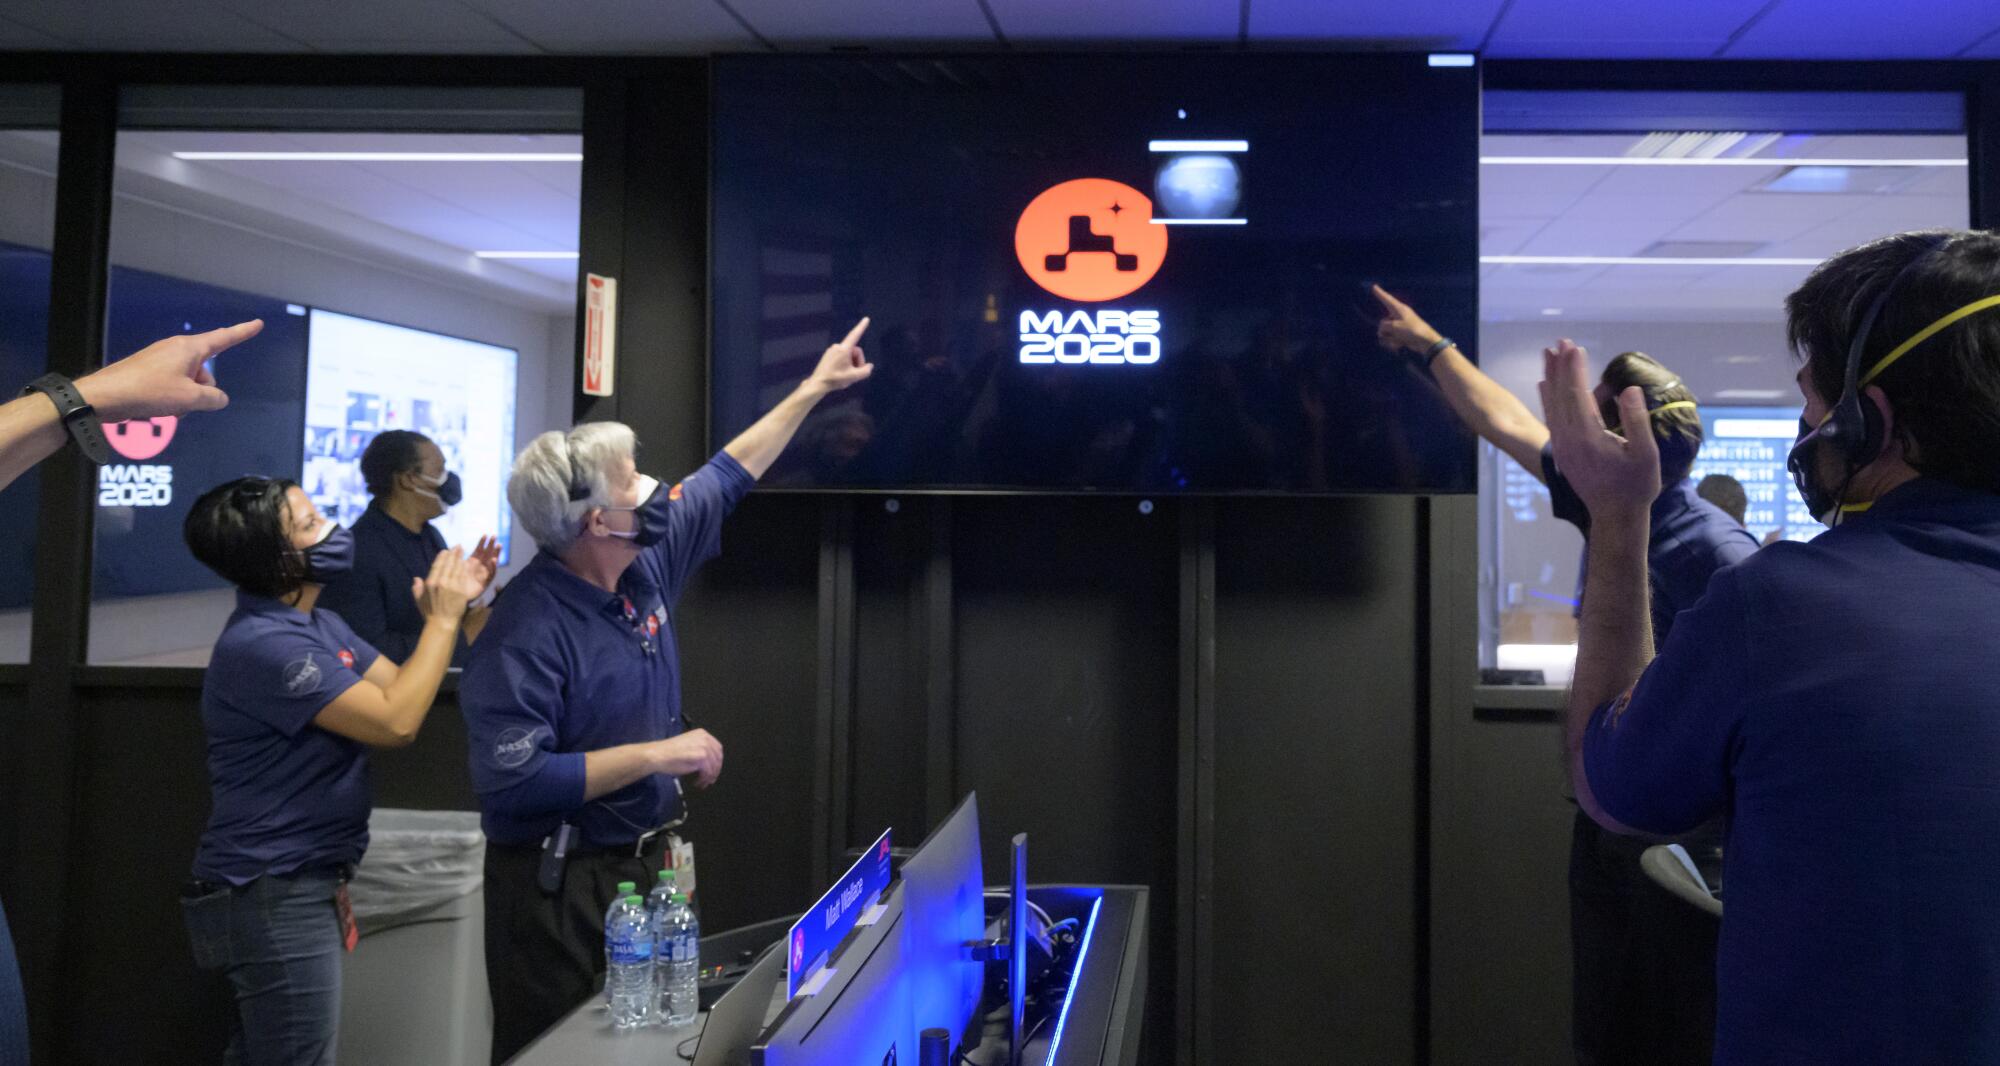 Members of NASA's Perseverance rover team clap and point to a screen with a Mars 2020 logo